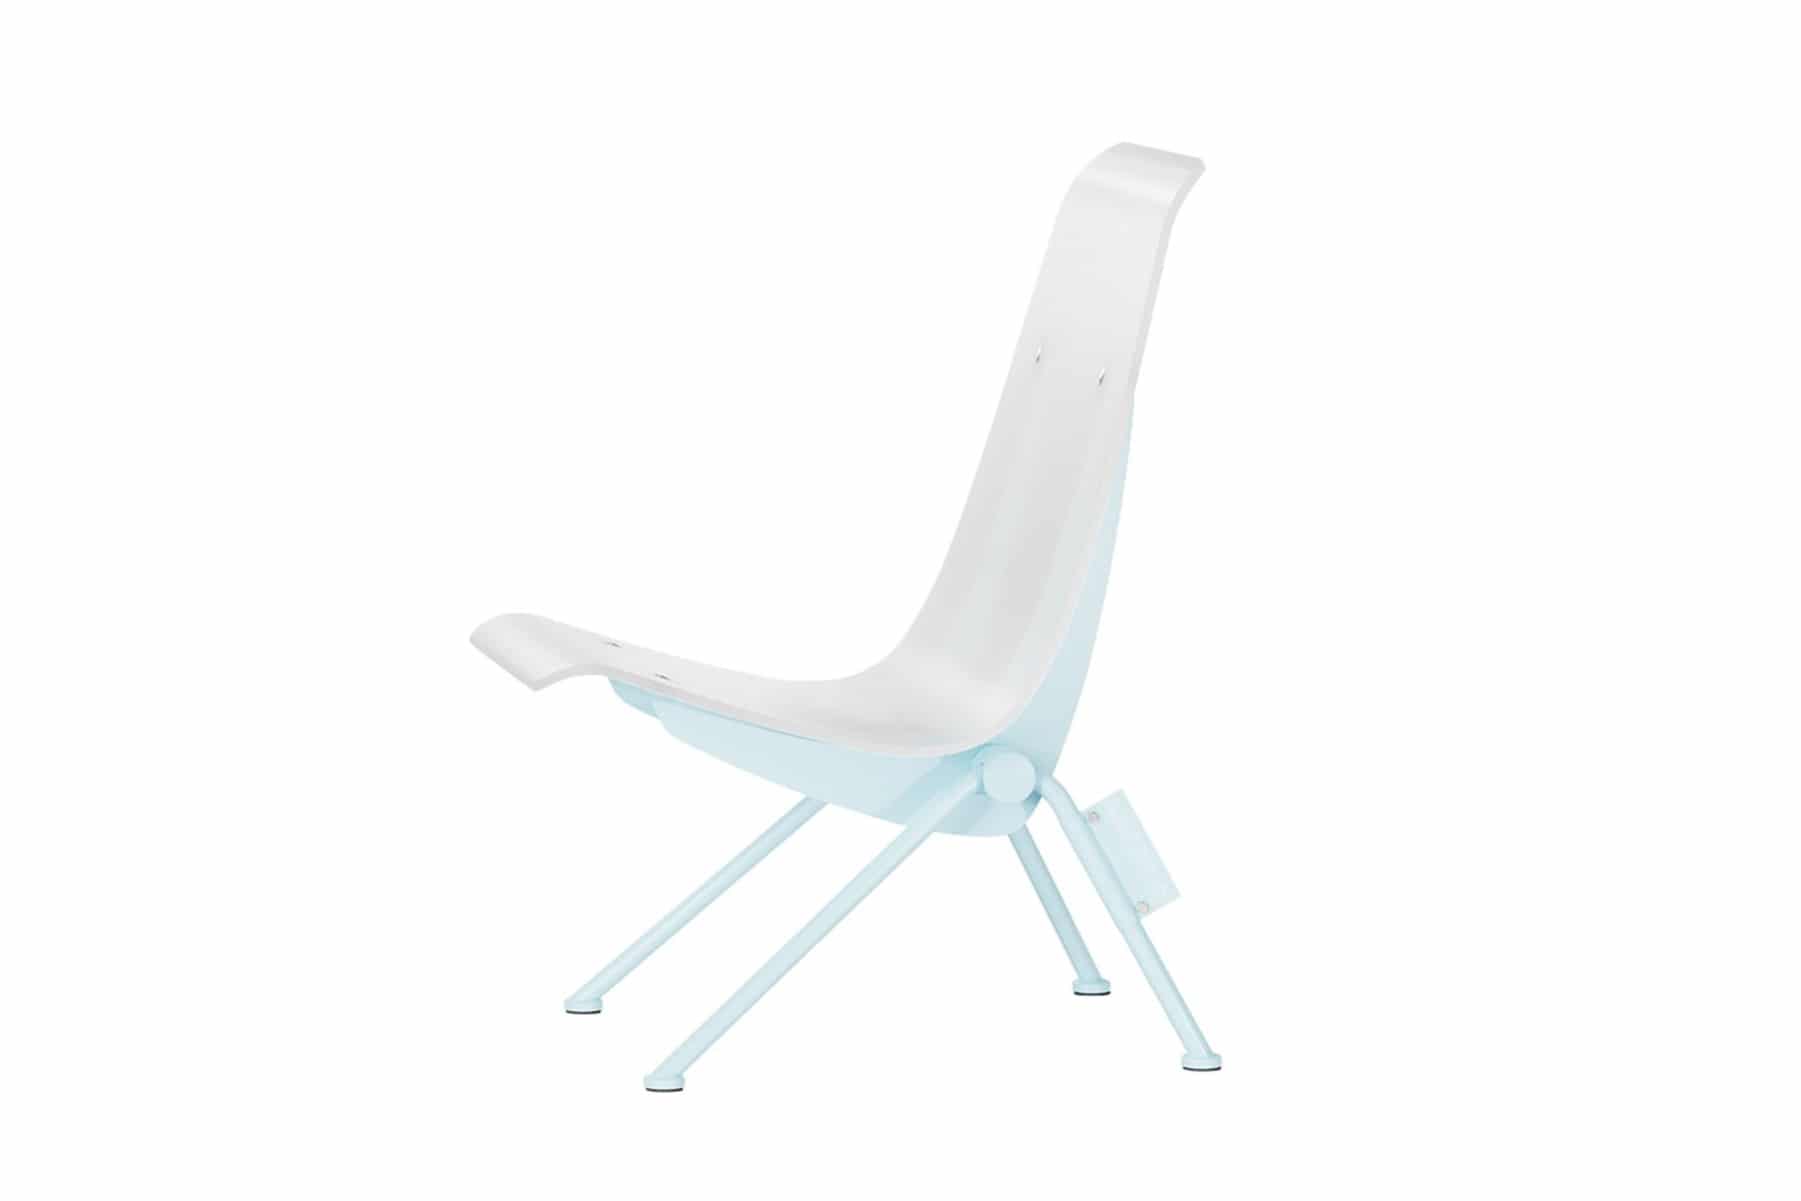 Virgil Abloh's latest furniture collaboration with Vitra has arrived - RUSSH